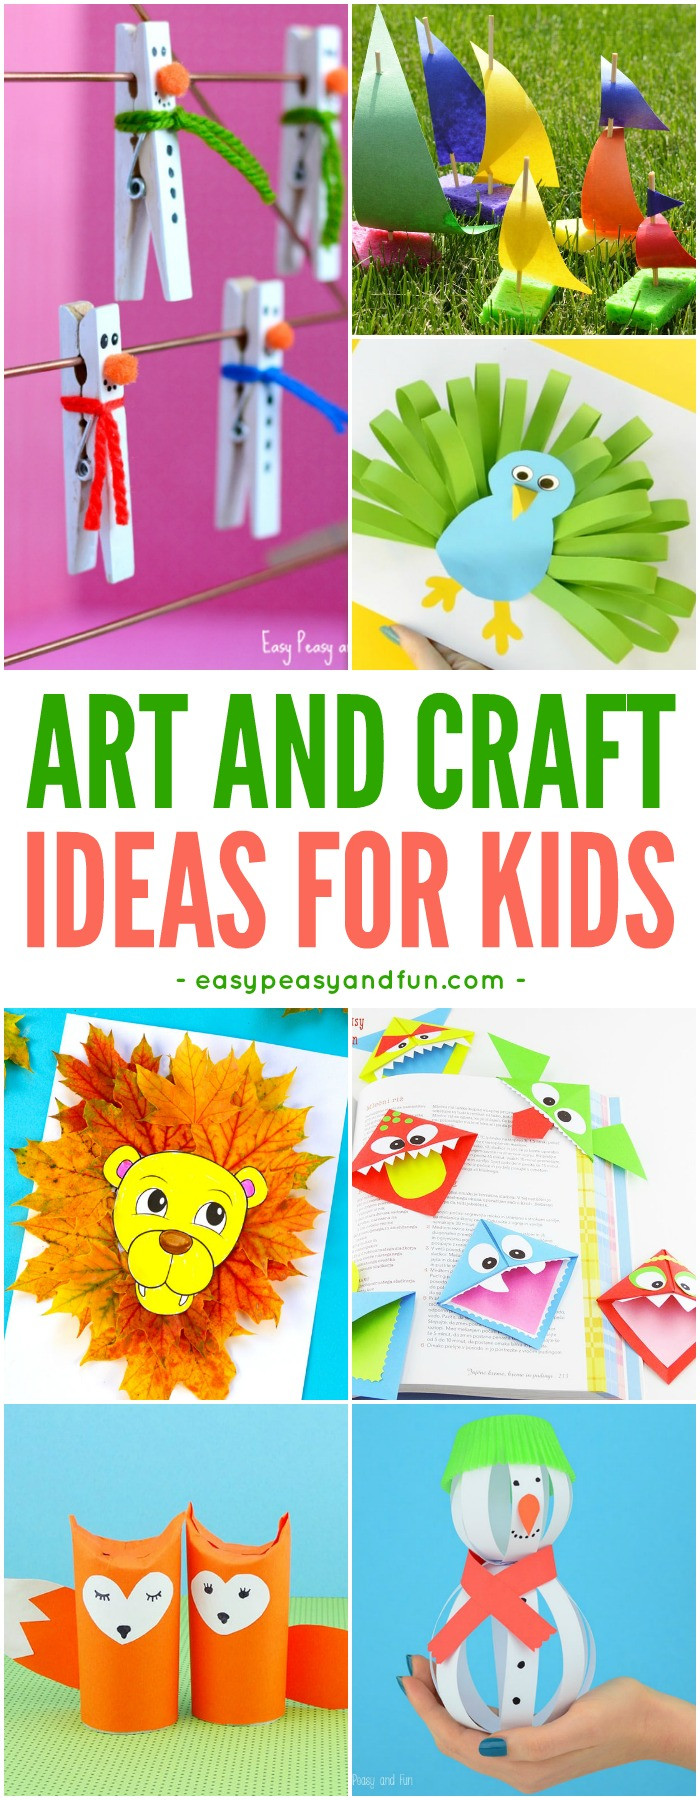 Arts &amp; Crafts For Toddlers
 Crafts For Kids Tons of Art and Craft Ideas for Kids to